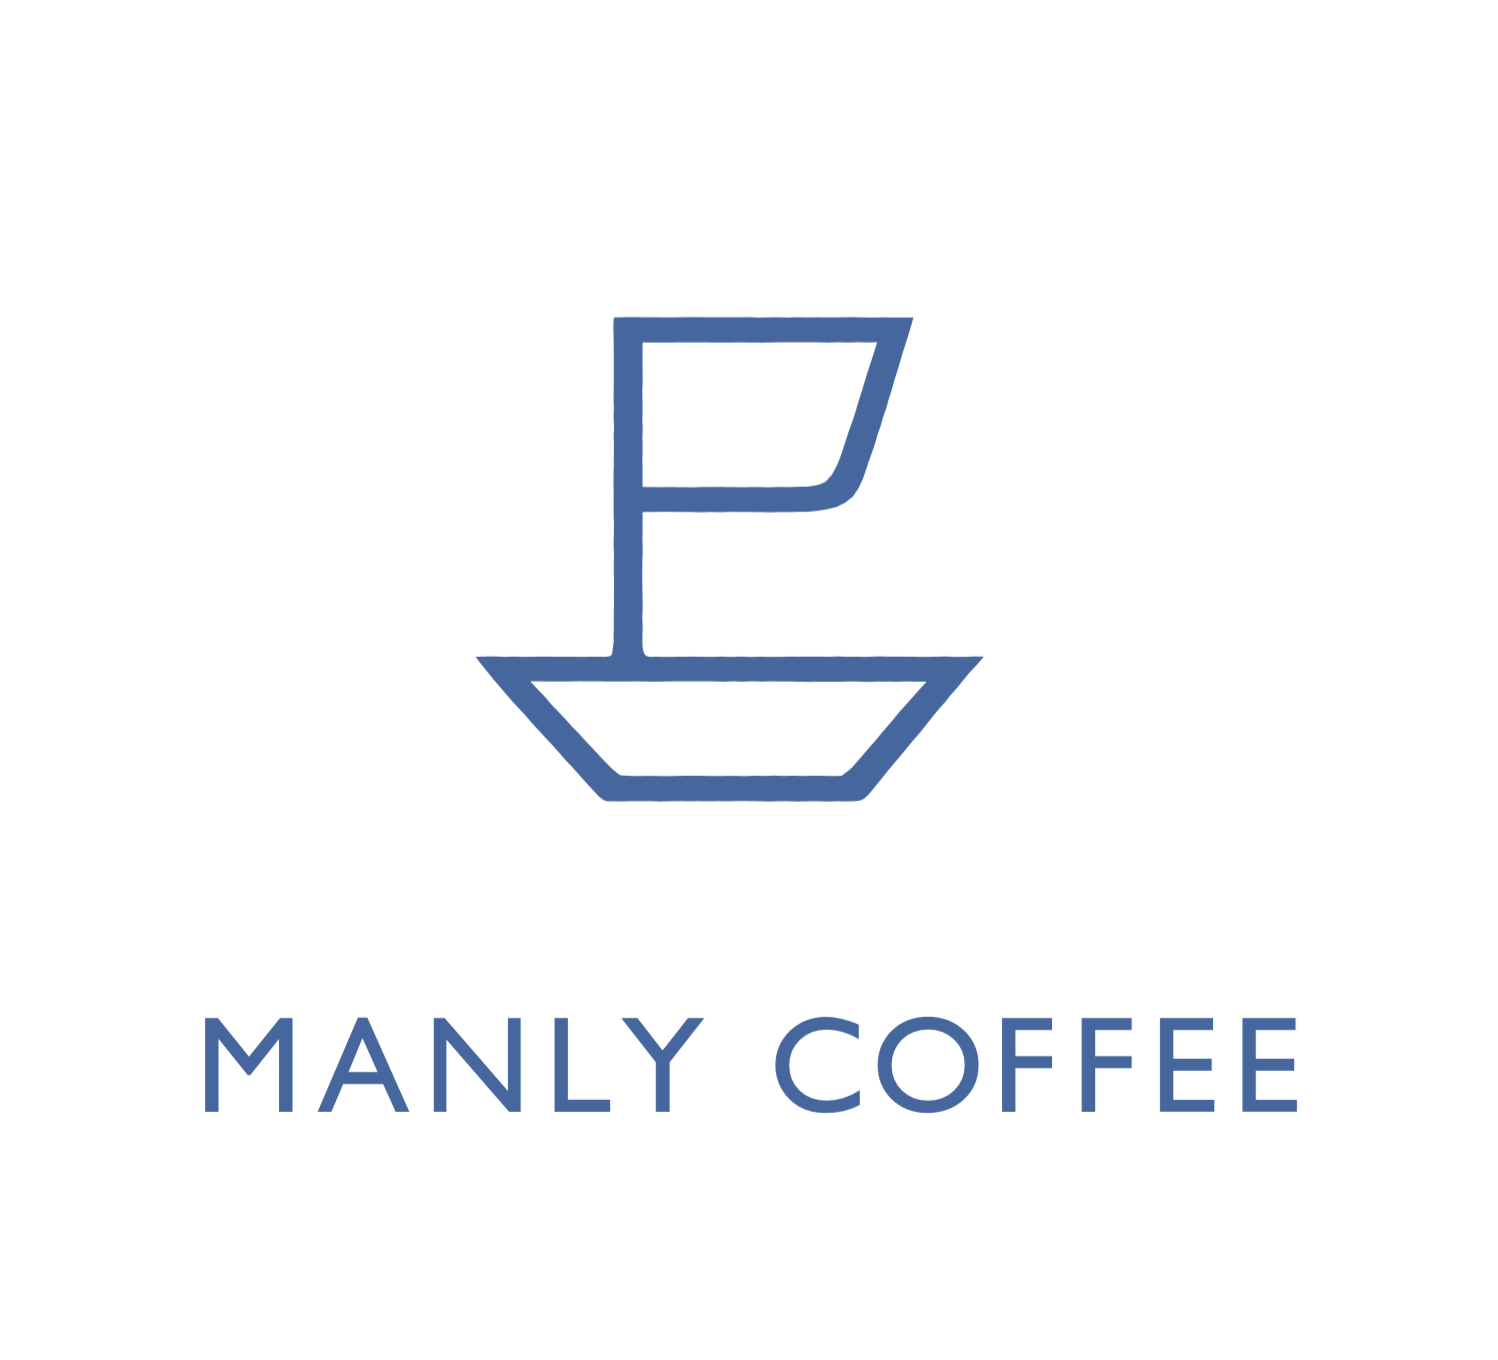 ManlyCoffee